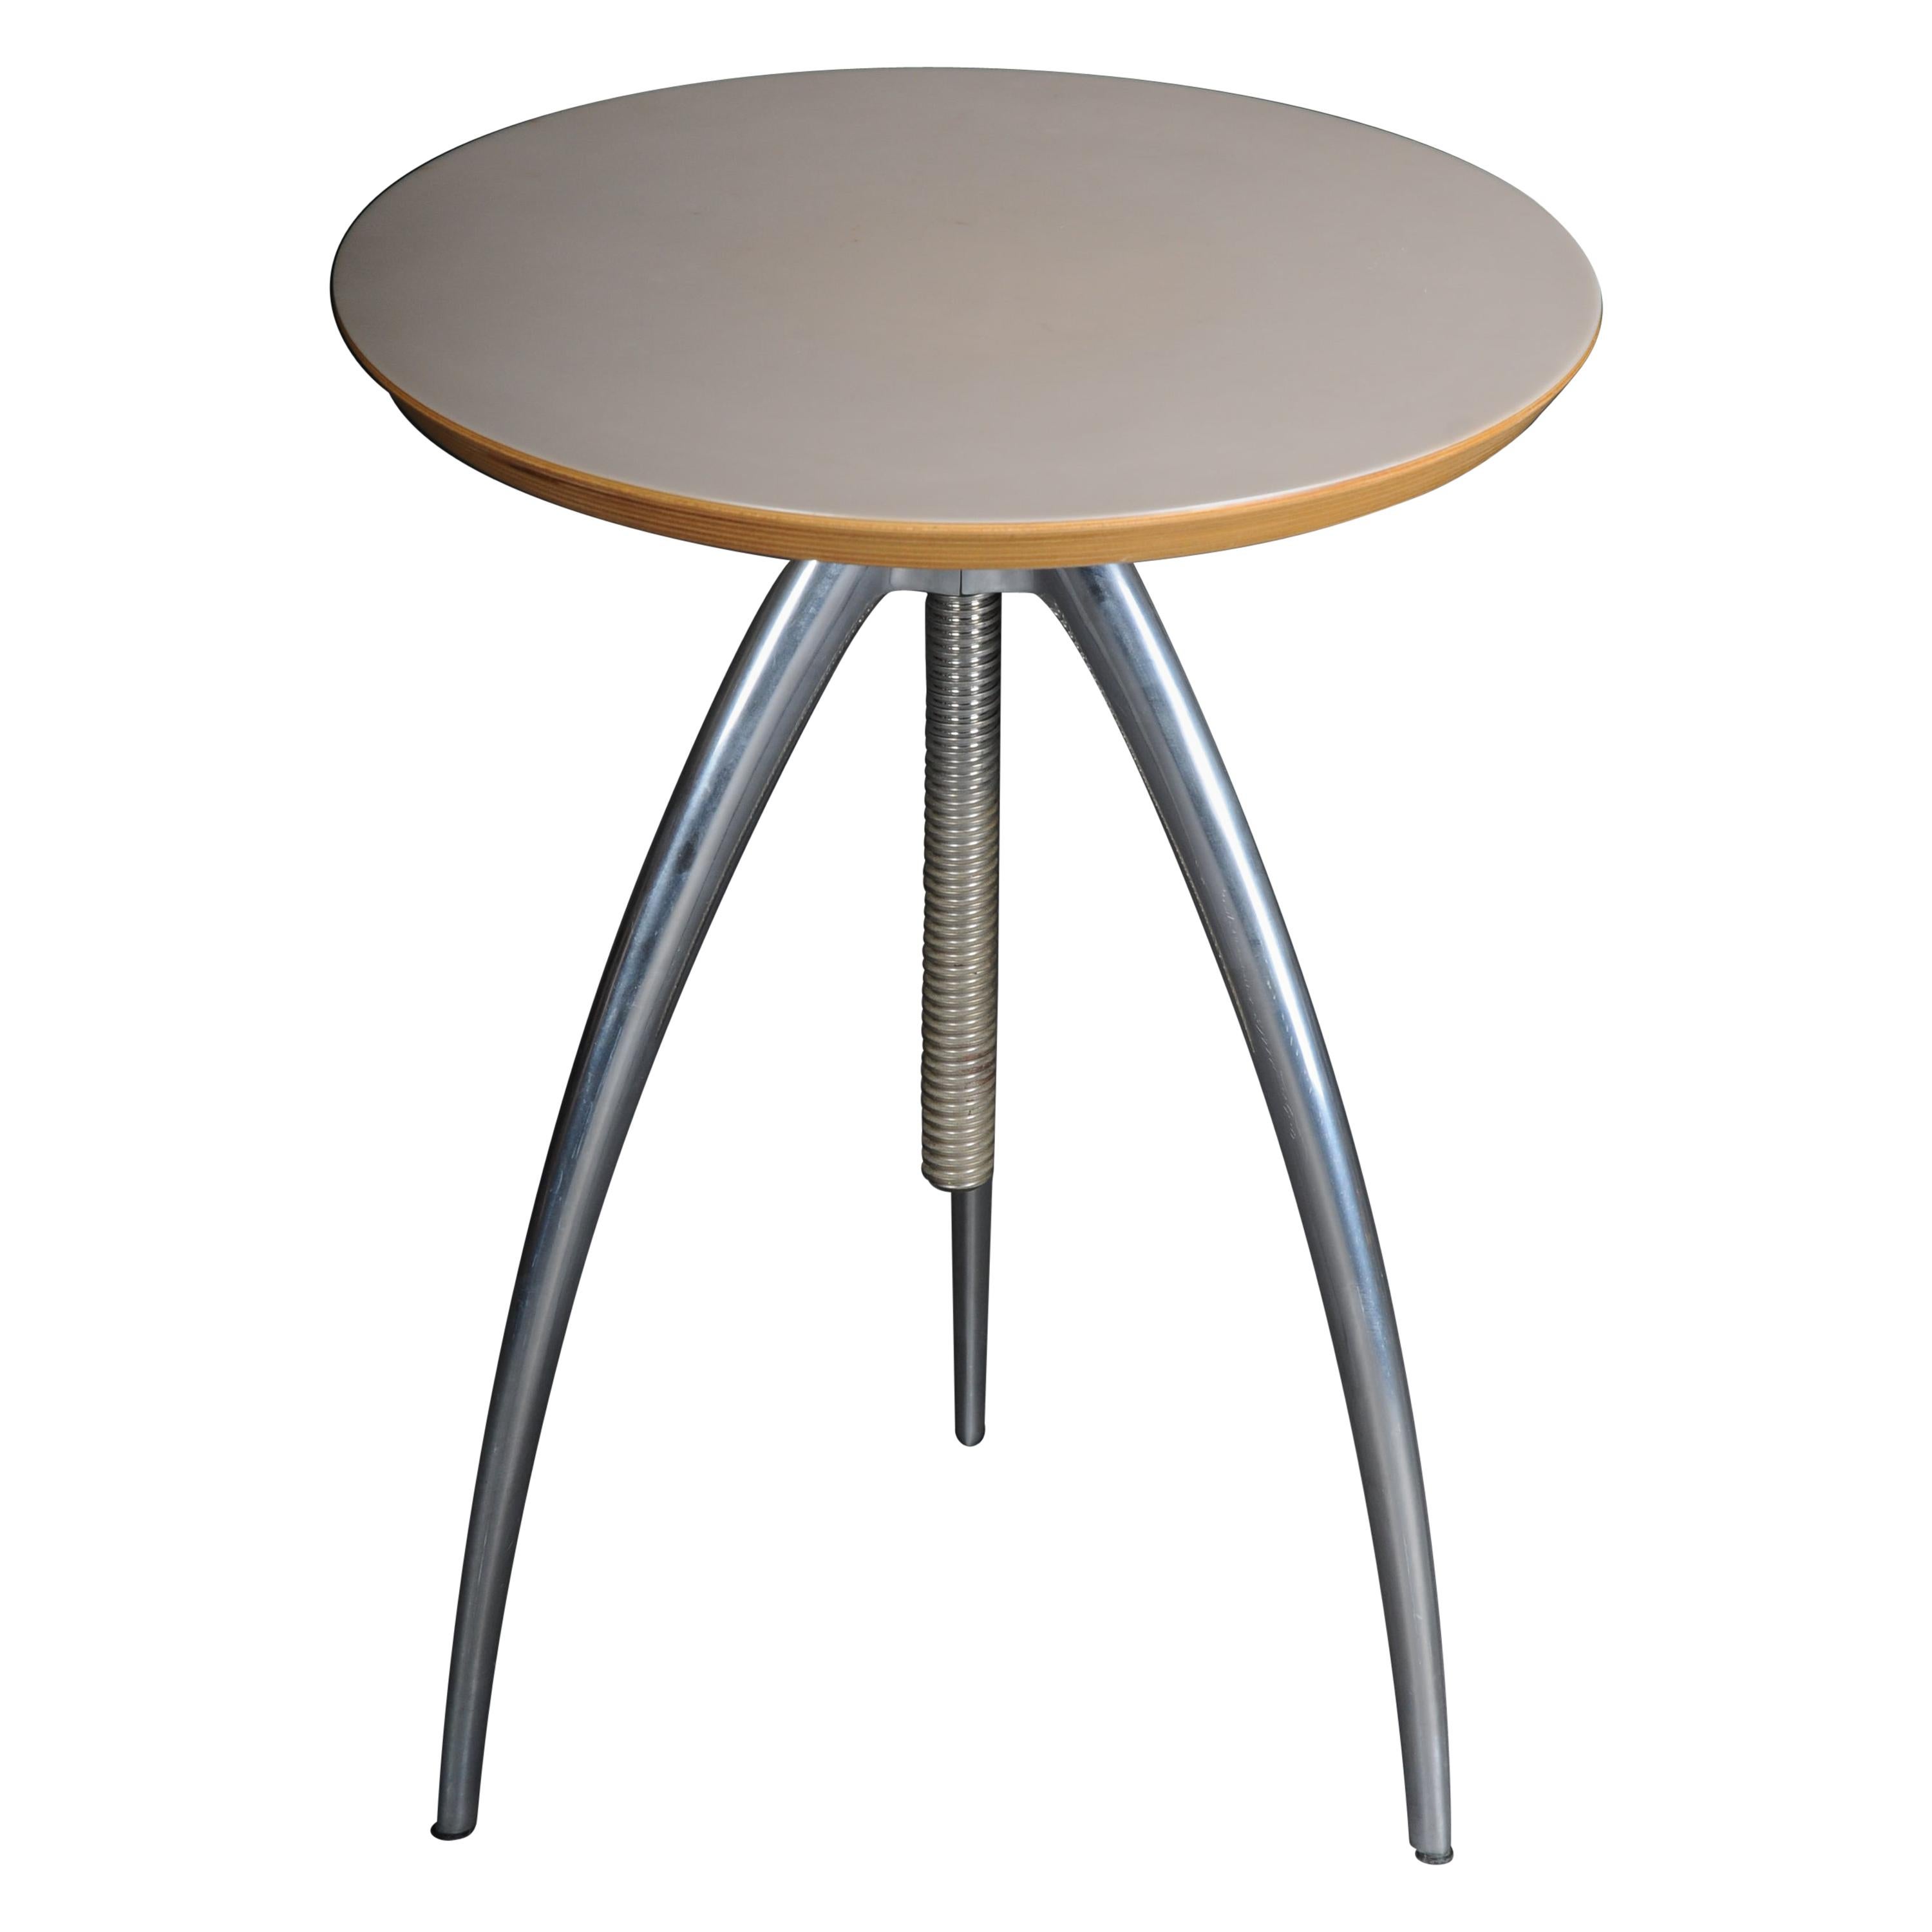 Designer Side Table / Table Philippe Starck Driade Vicieuse Ubik Aleph at  1stDibs | philippe starck side table